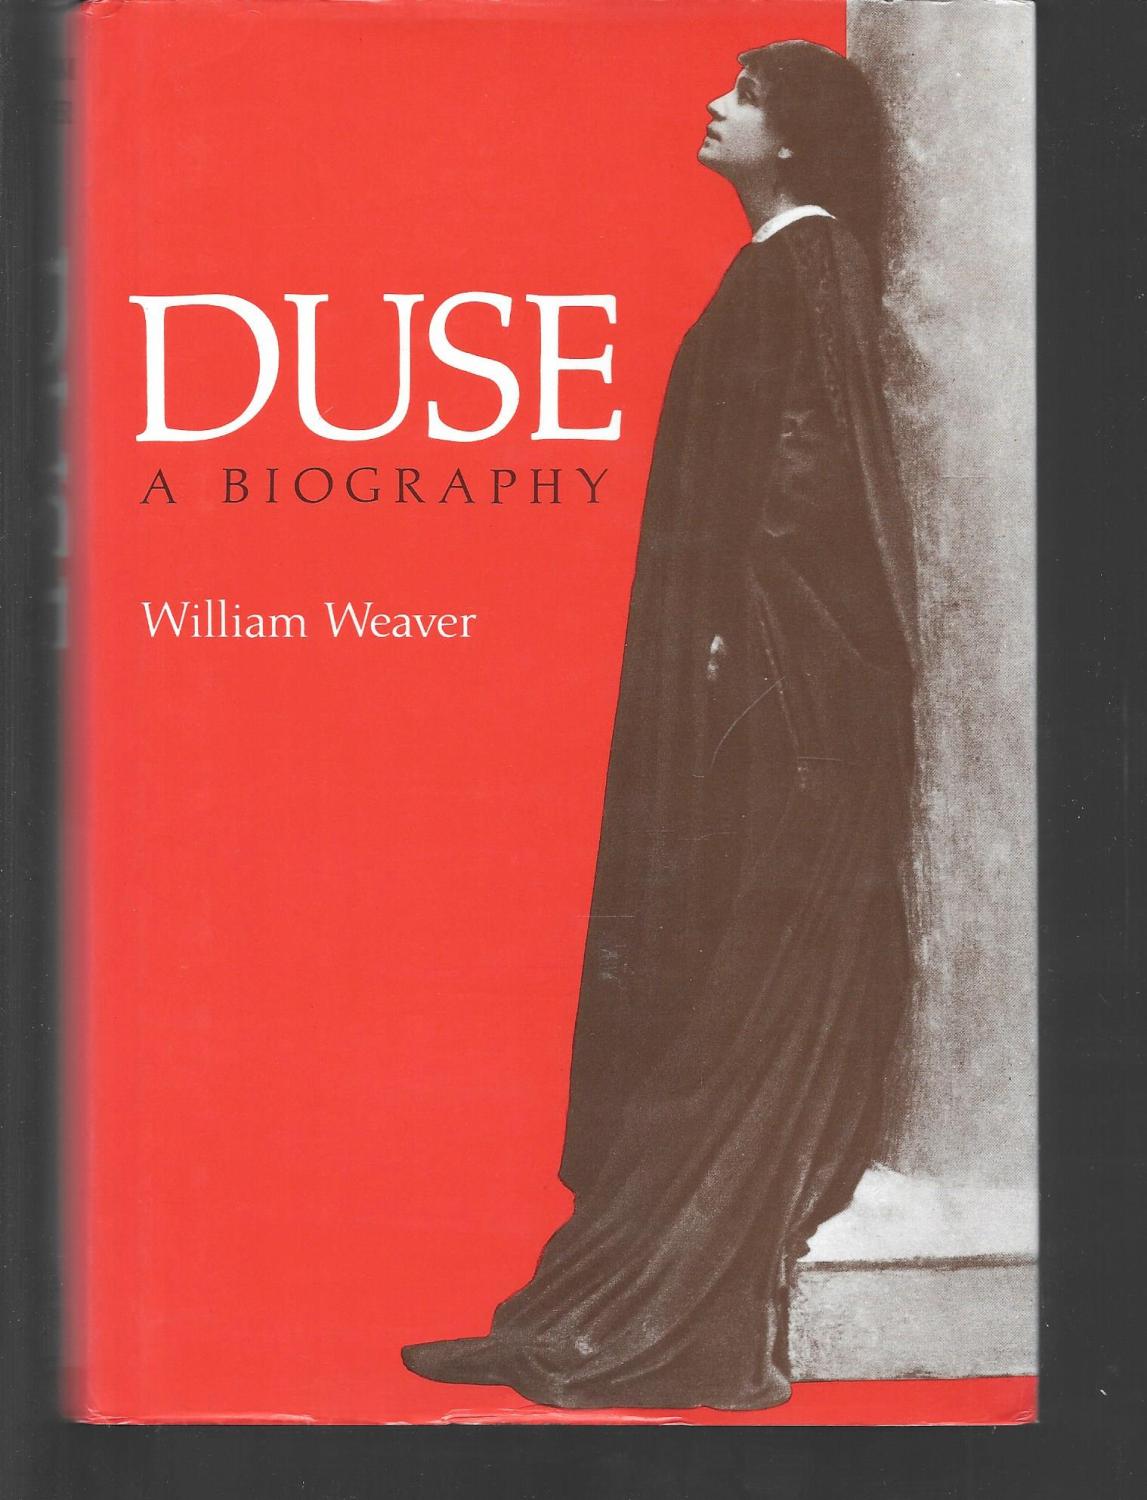 duse a biography - william weaver (eleonora duse )